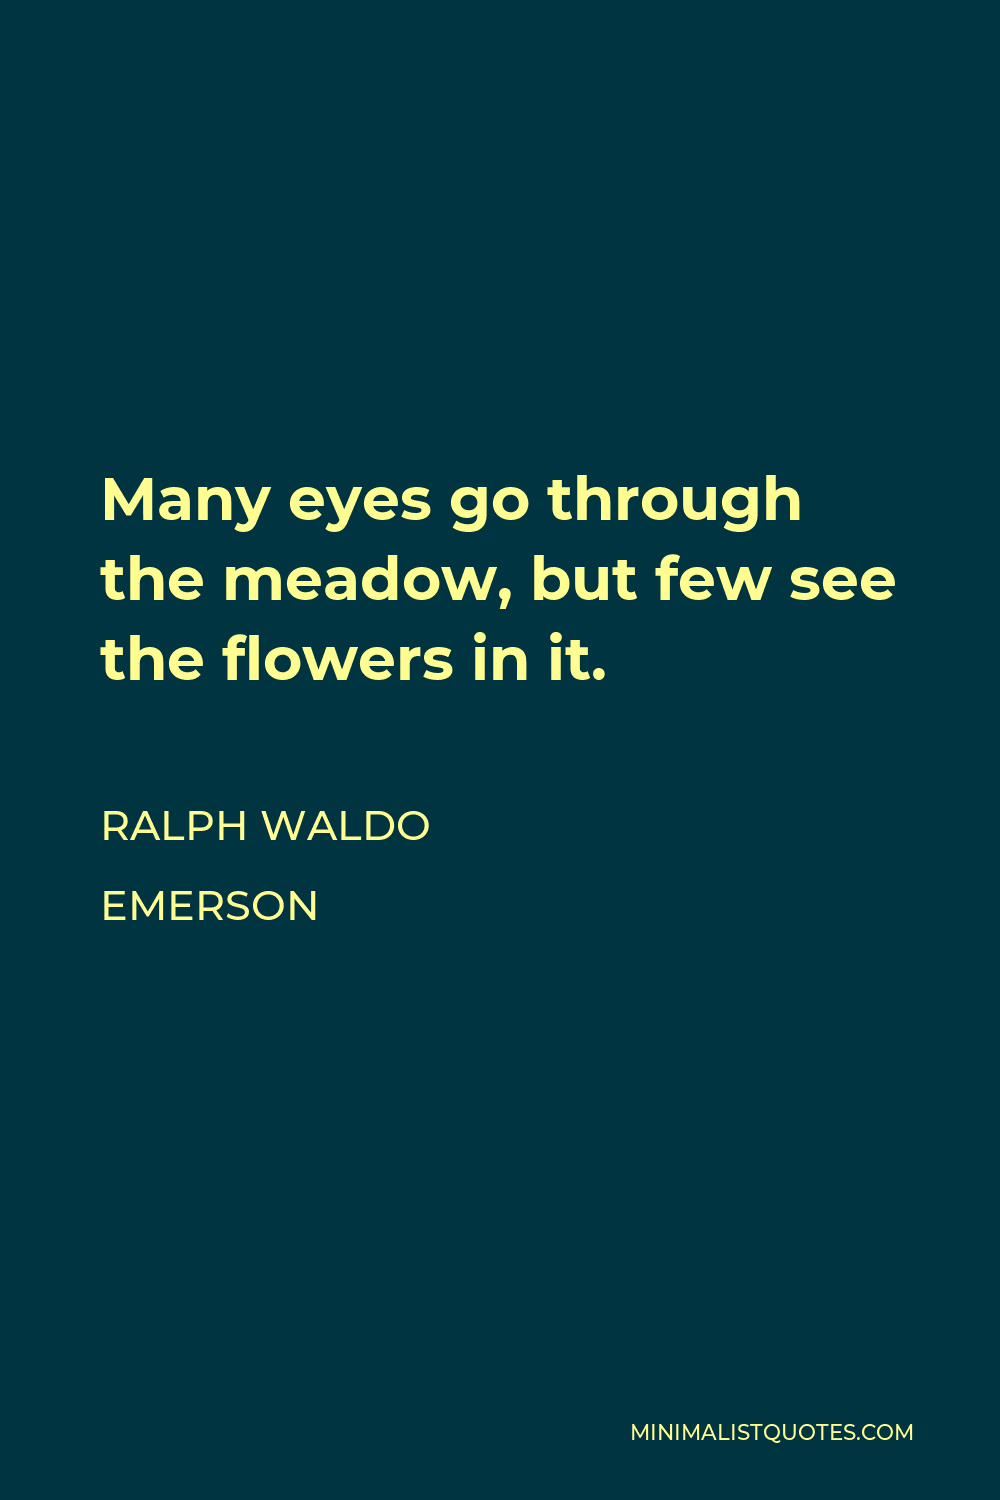 Ralph Waldo Emerson Quote - Many eyes go through the meadow, but few see the flowers in it.